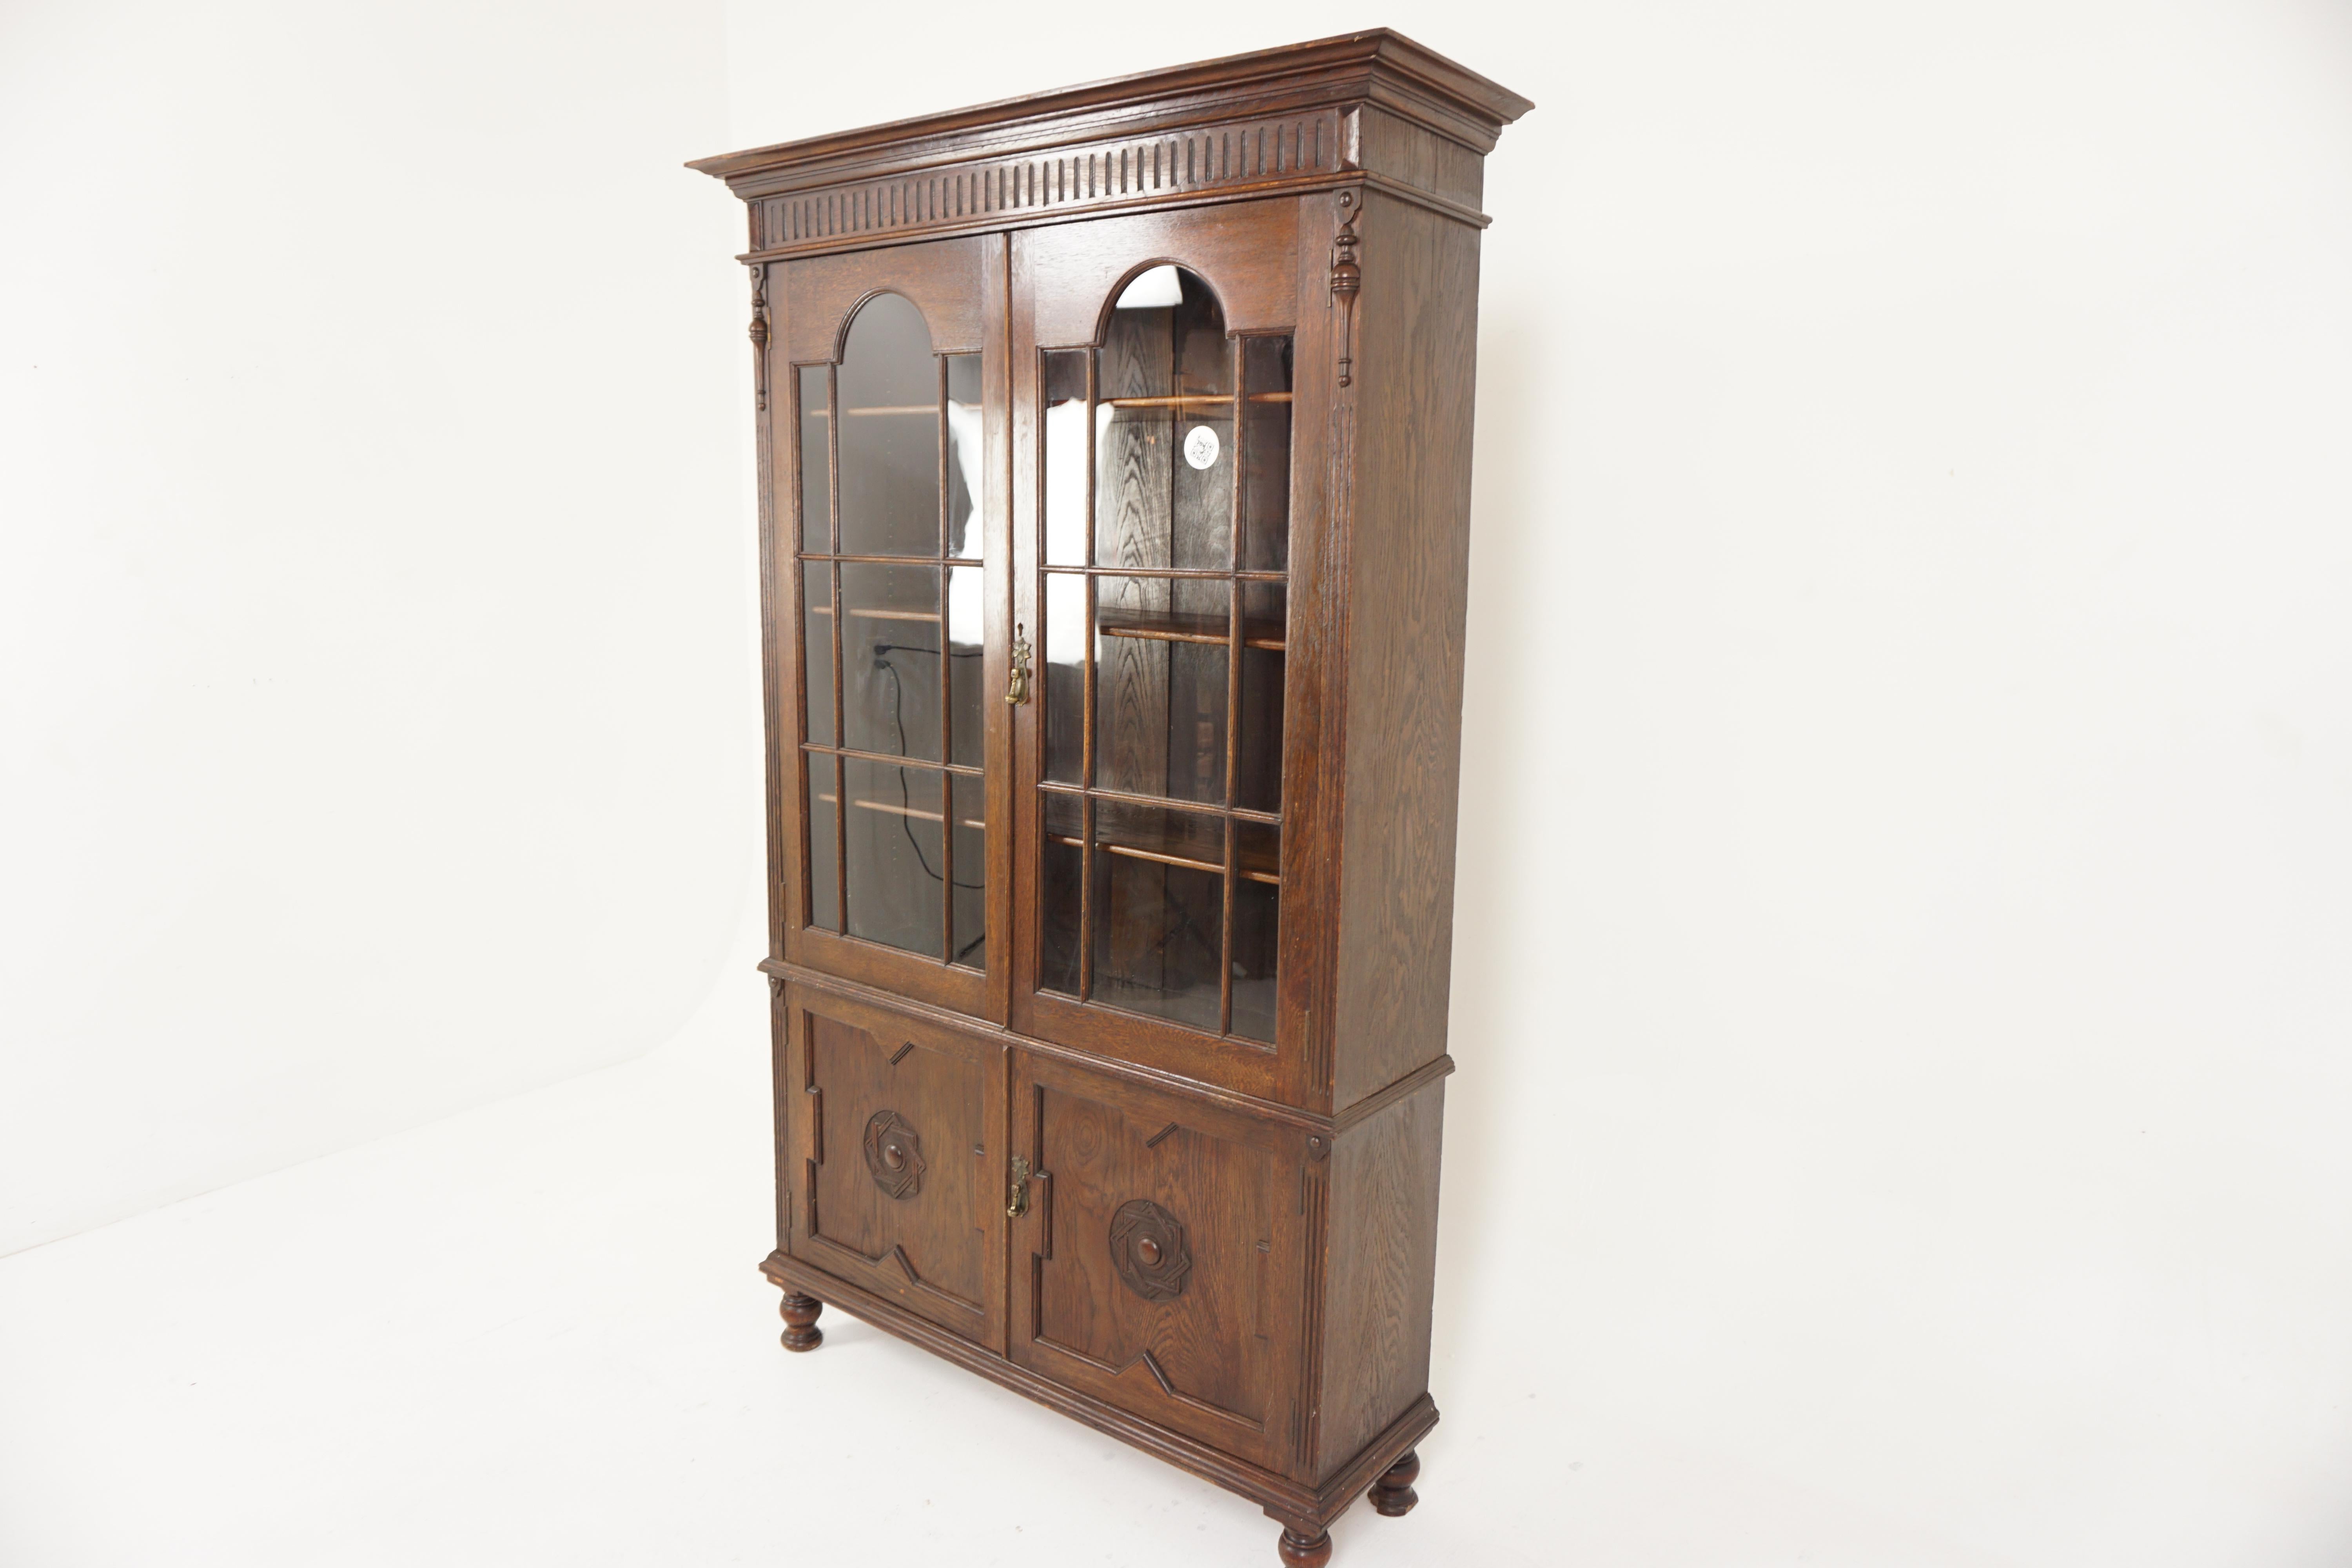 Antique Two Four Oak cabinet bookcase, display cabinet, Scotland 1910, H751

Scotland 1910
Solid Oak
Original finish
Flared out cornice on top
Carved frieze below
With a pair of original glass doors
With arched tops and moulded fronts
Three